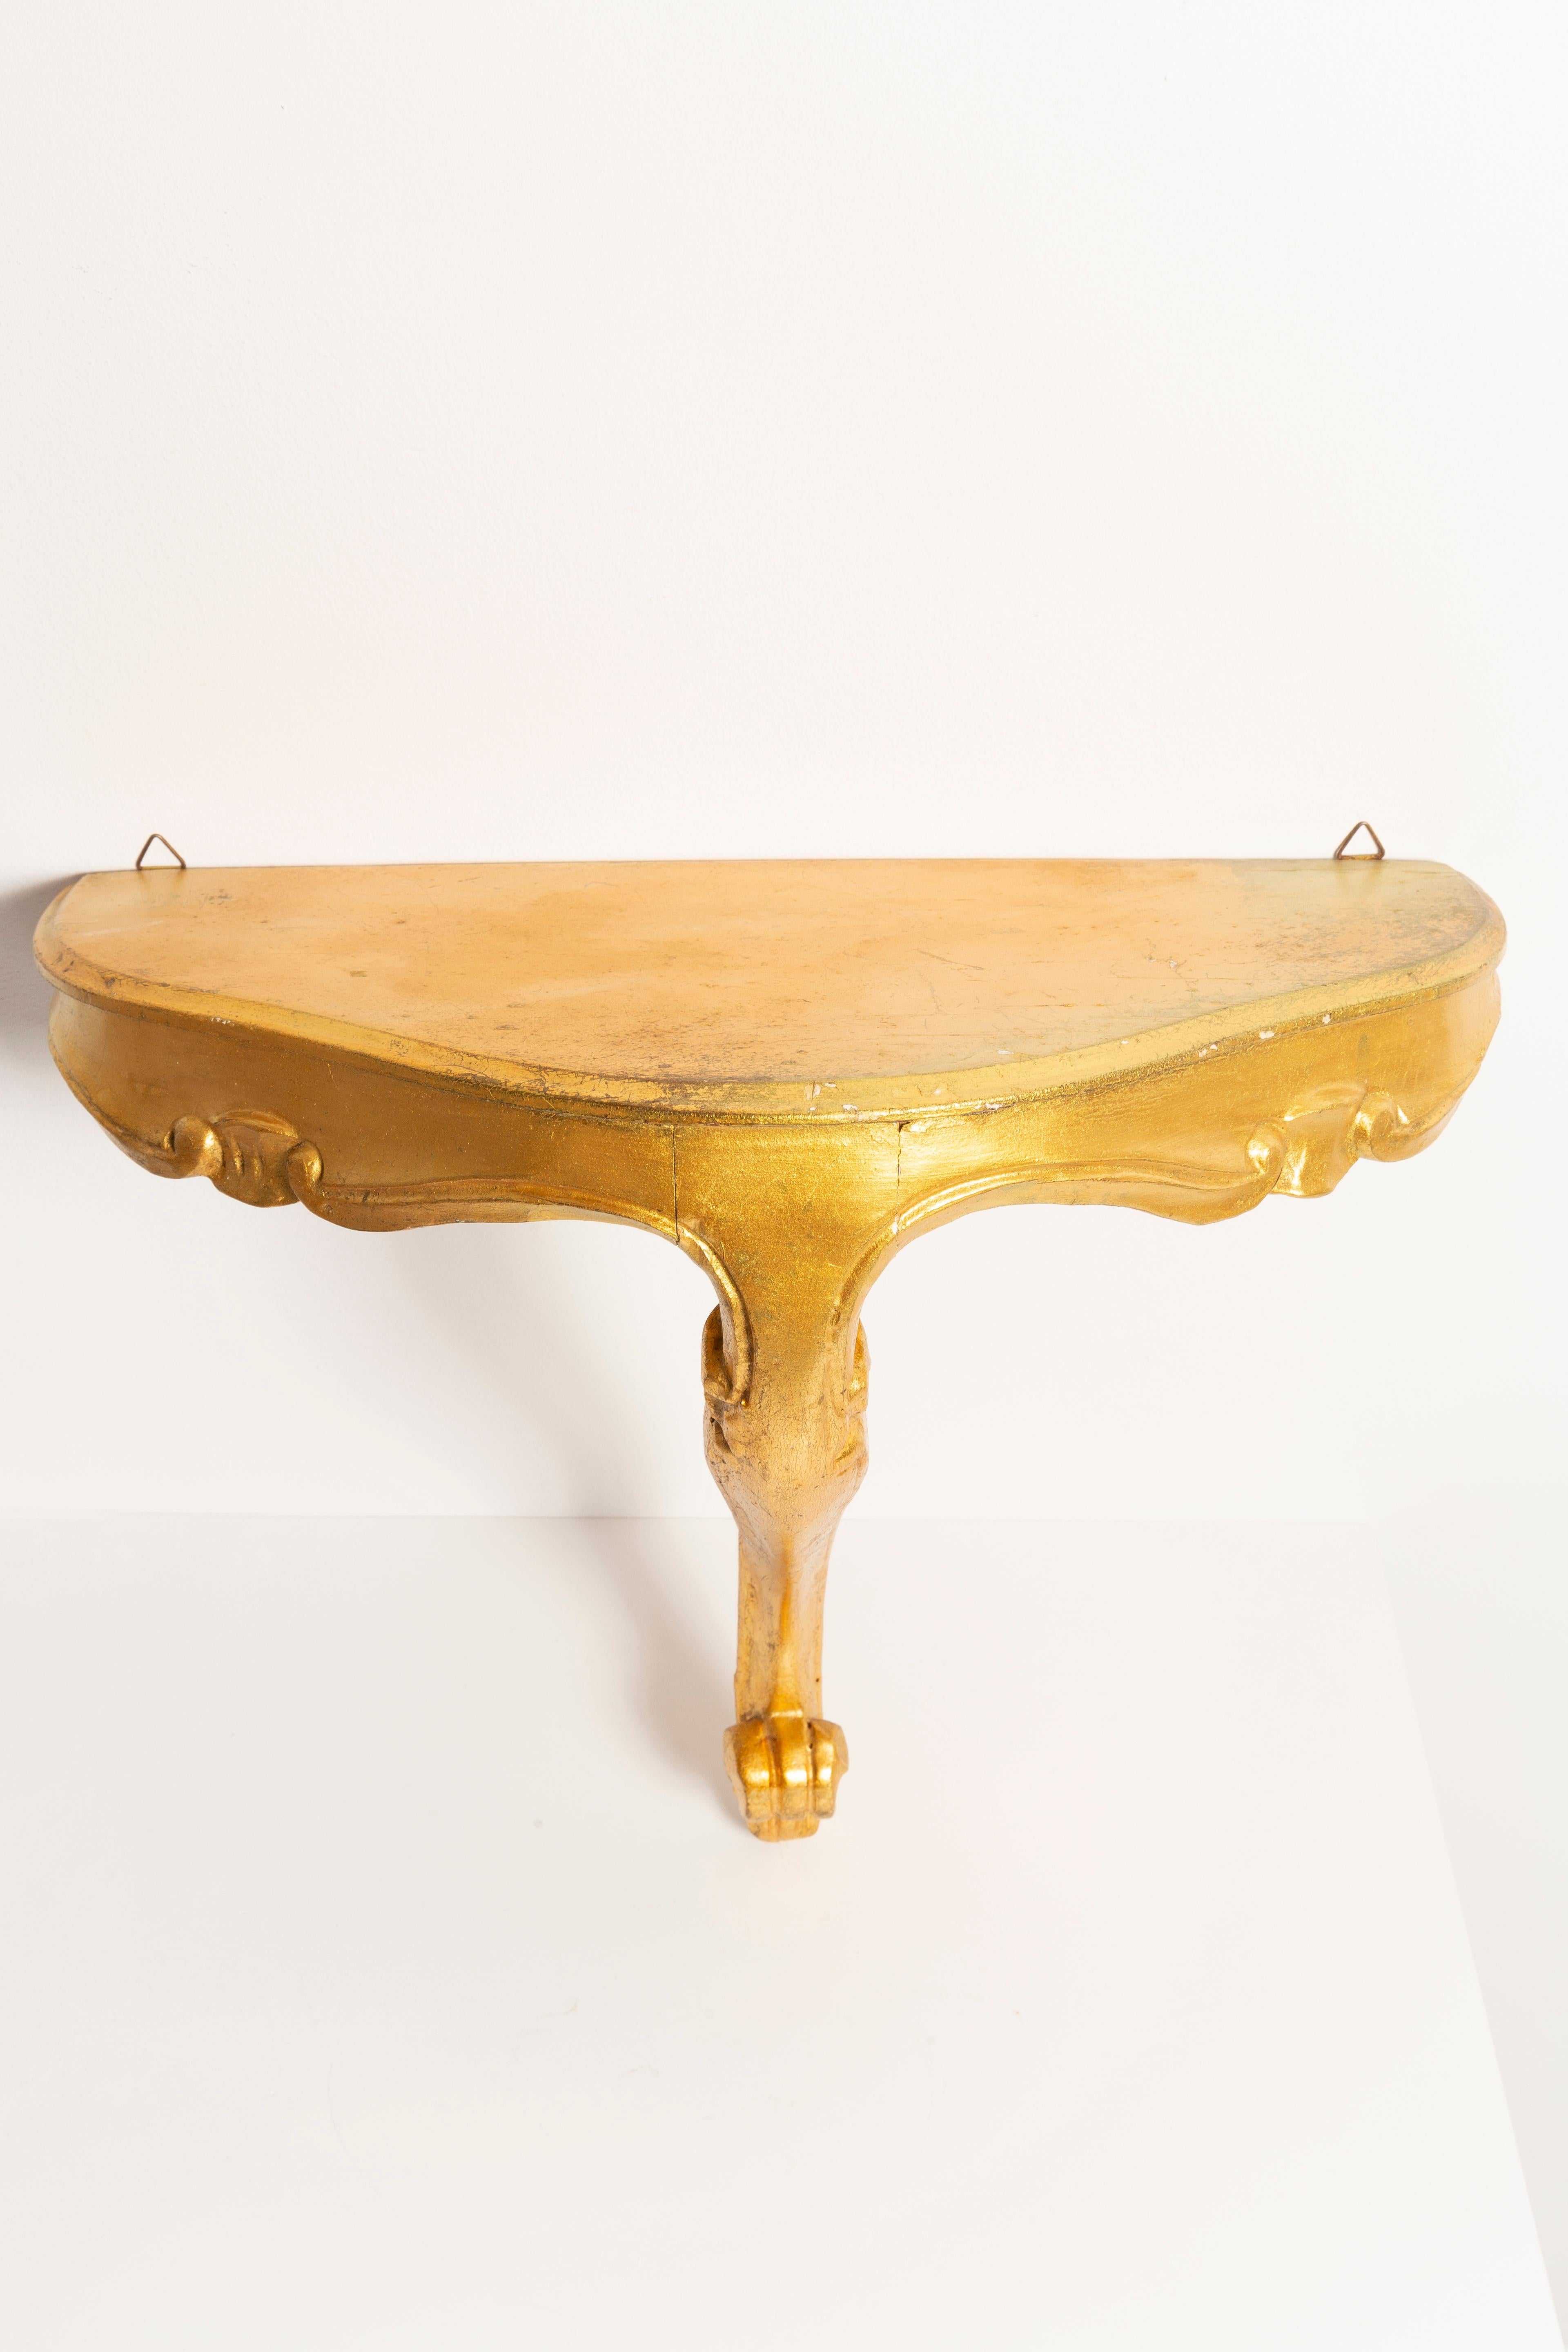 Mid-Century Modern 20th Century Wall Console Table Shelf Gold Curvy Decorative Leg, Europe, 1960s For Sale